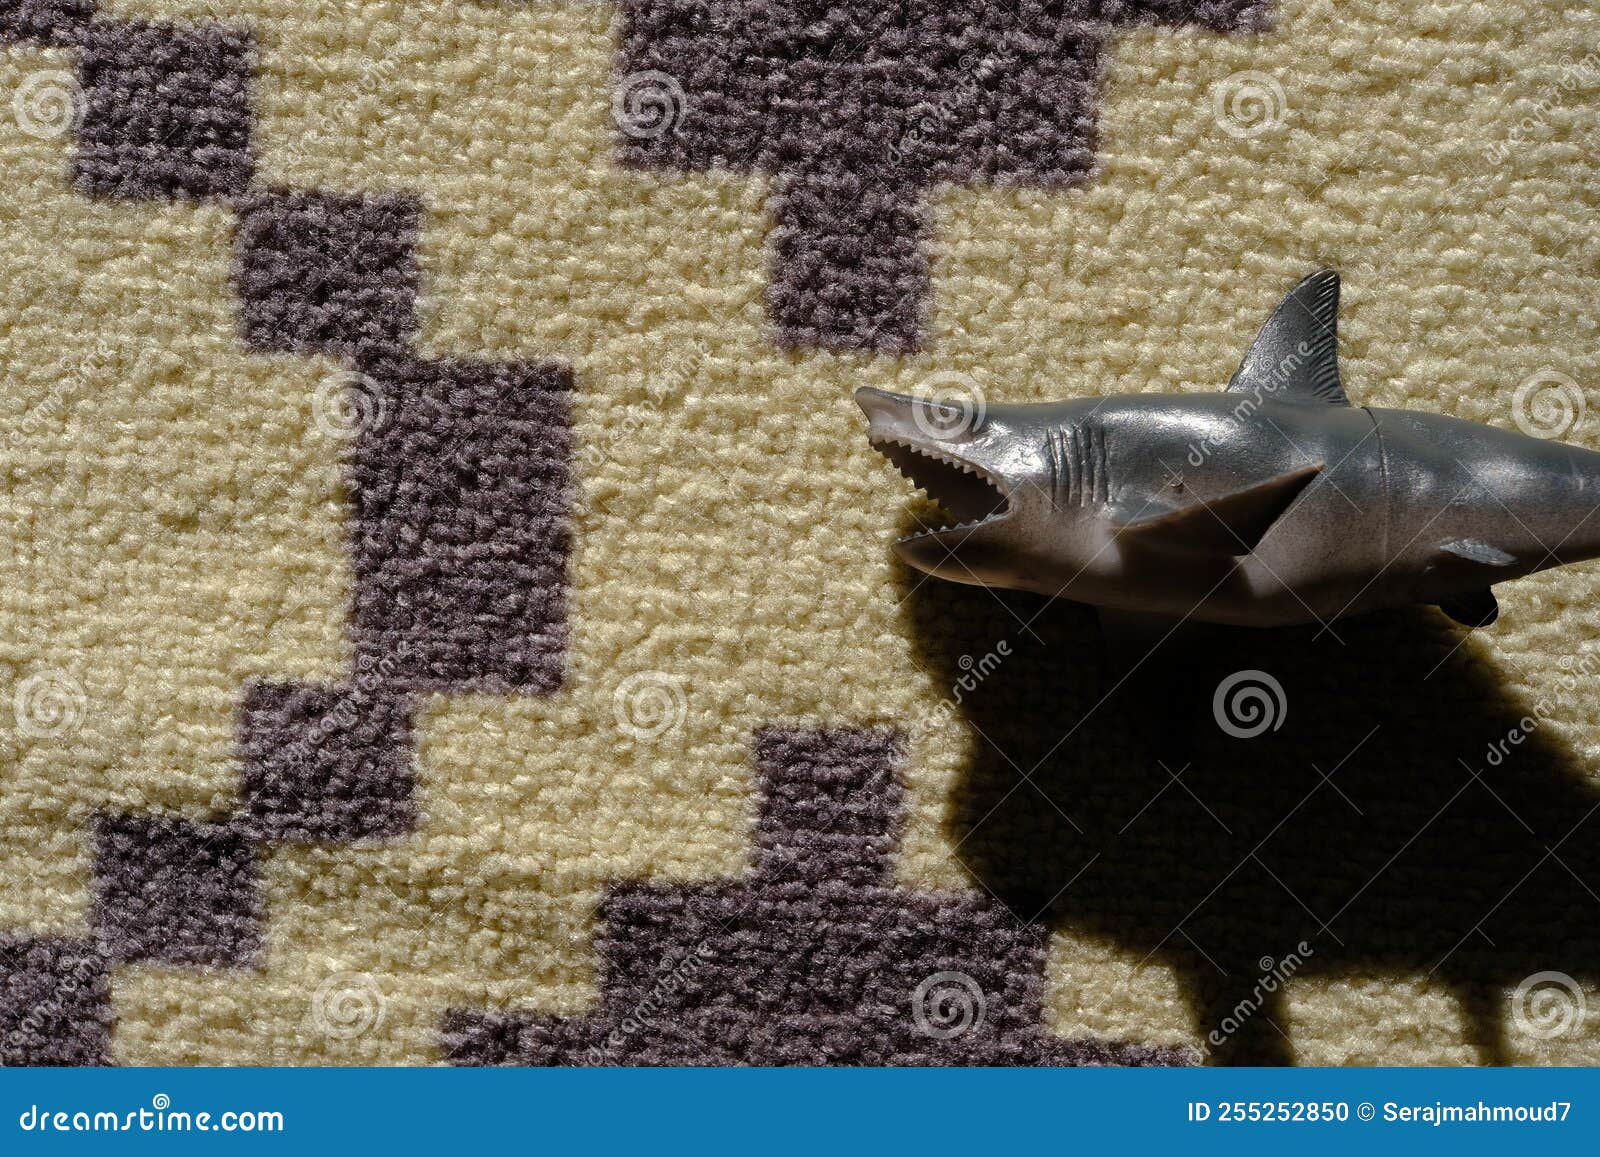 137 Clay Model Fish Stock Photos - Free & Royalty-Free Stock Photos from  Dreamstime